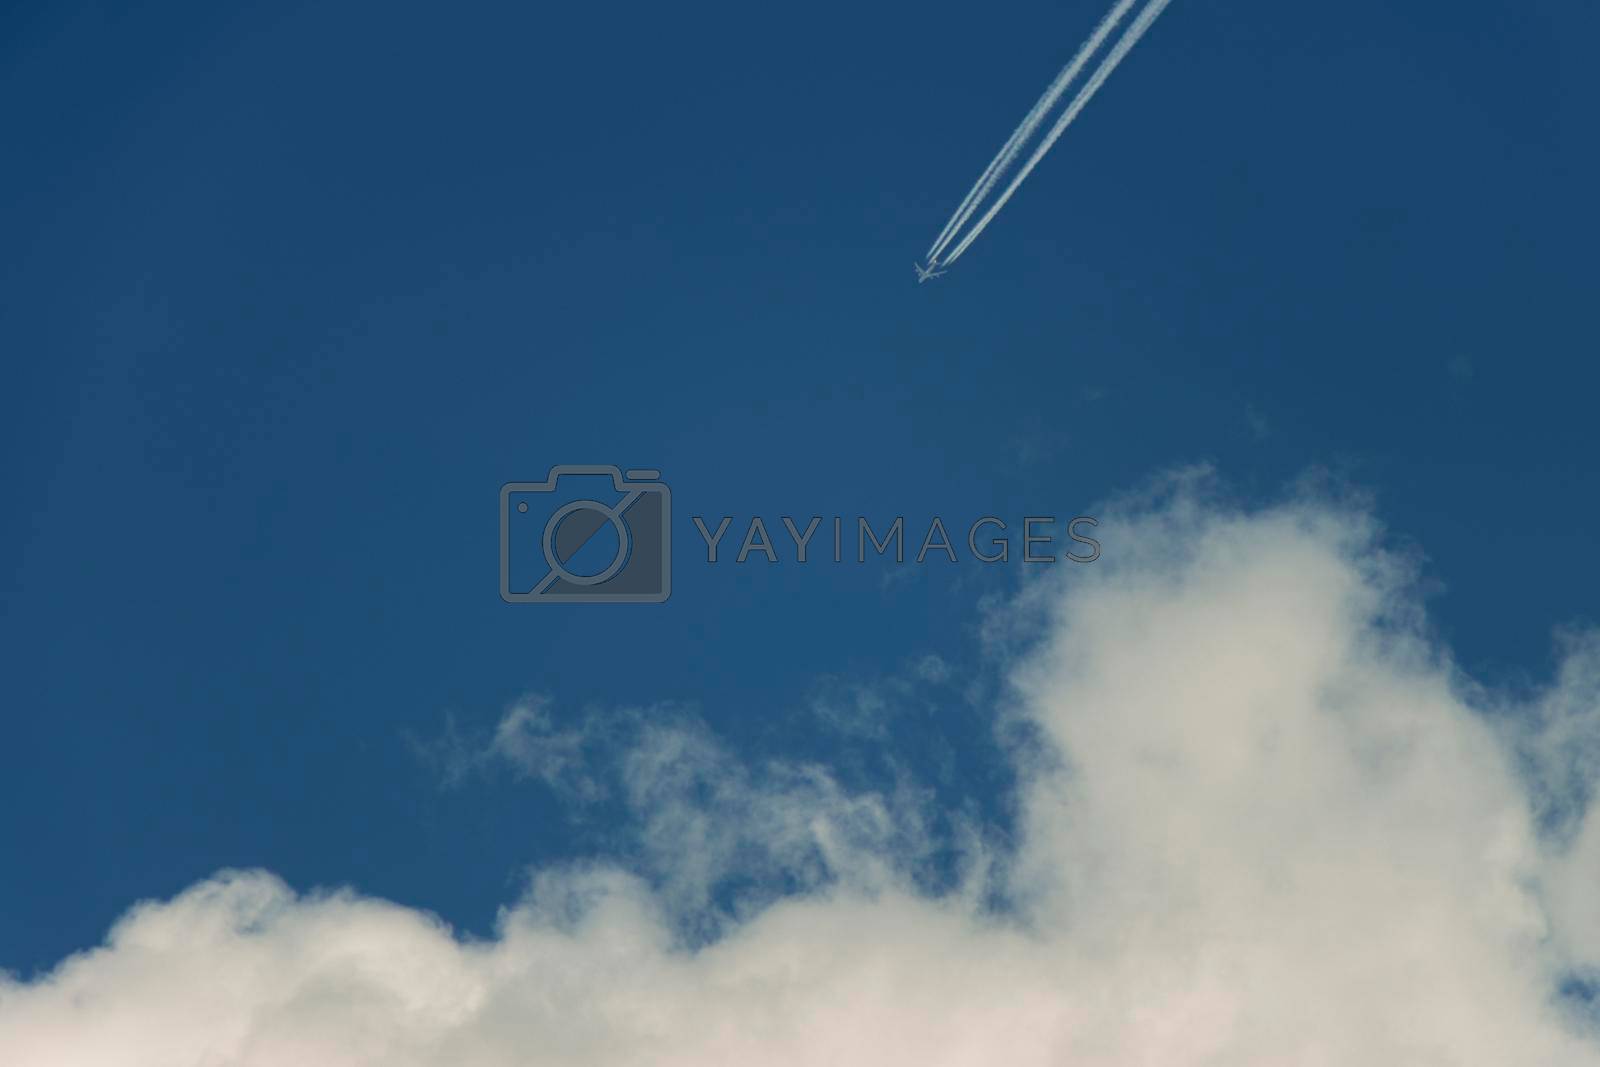 Airplane contrast against bright blue sky with a diagnonal straight condensation vapor trail, appearing as though it is heading towards a white candy floss cloud. Canon EOS 90D